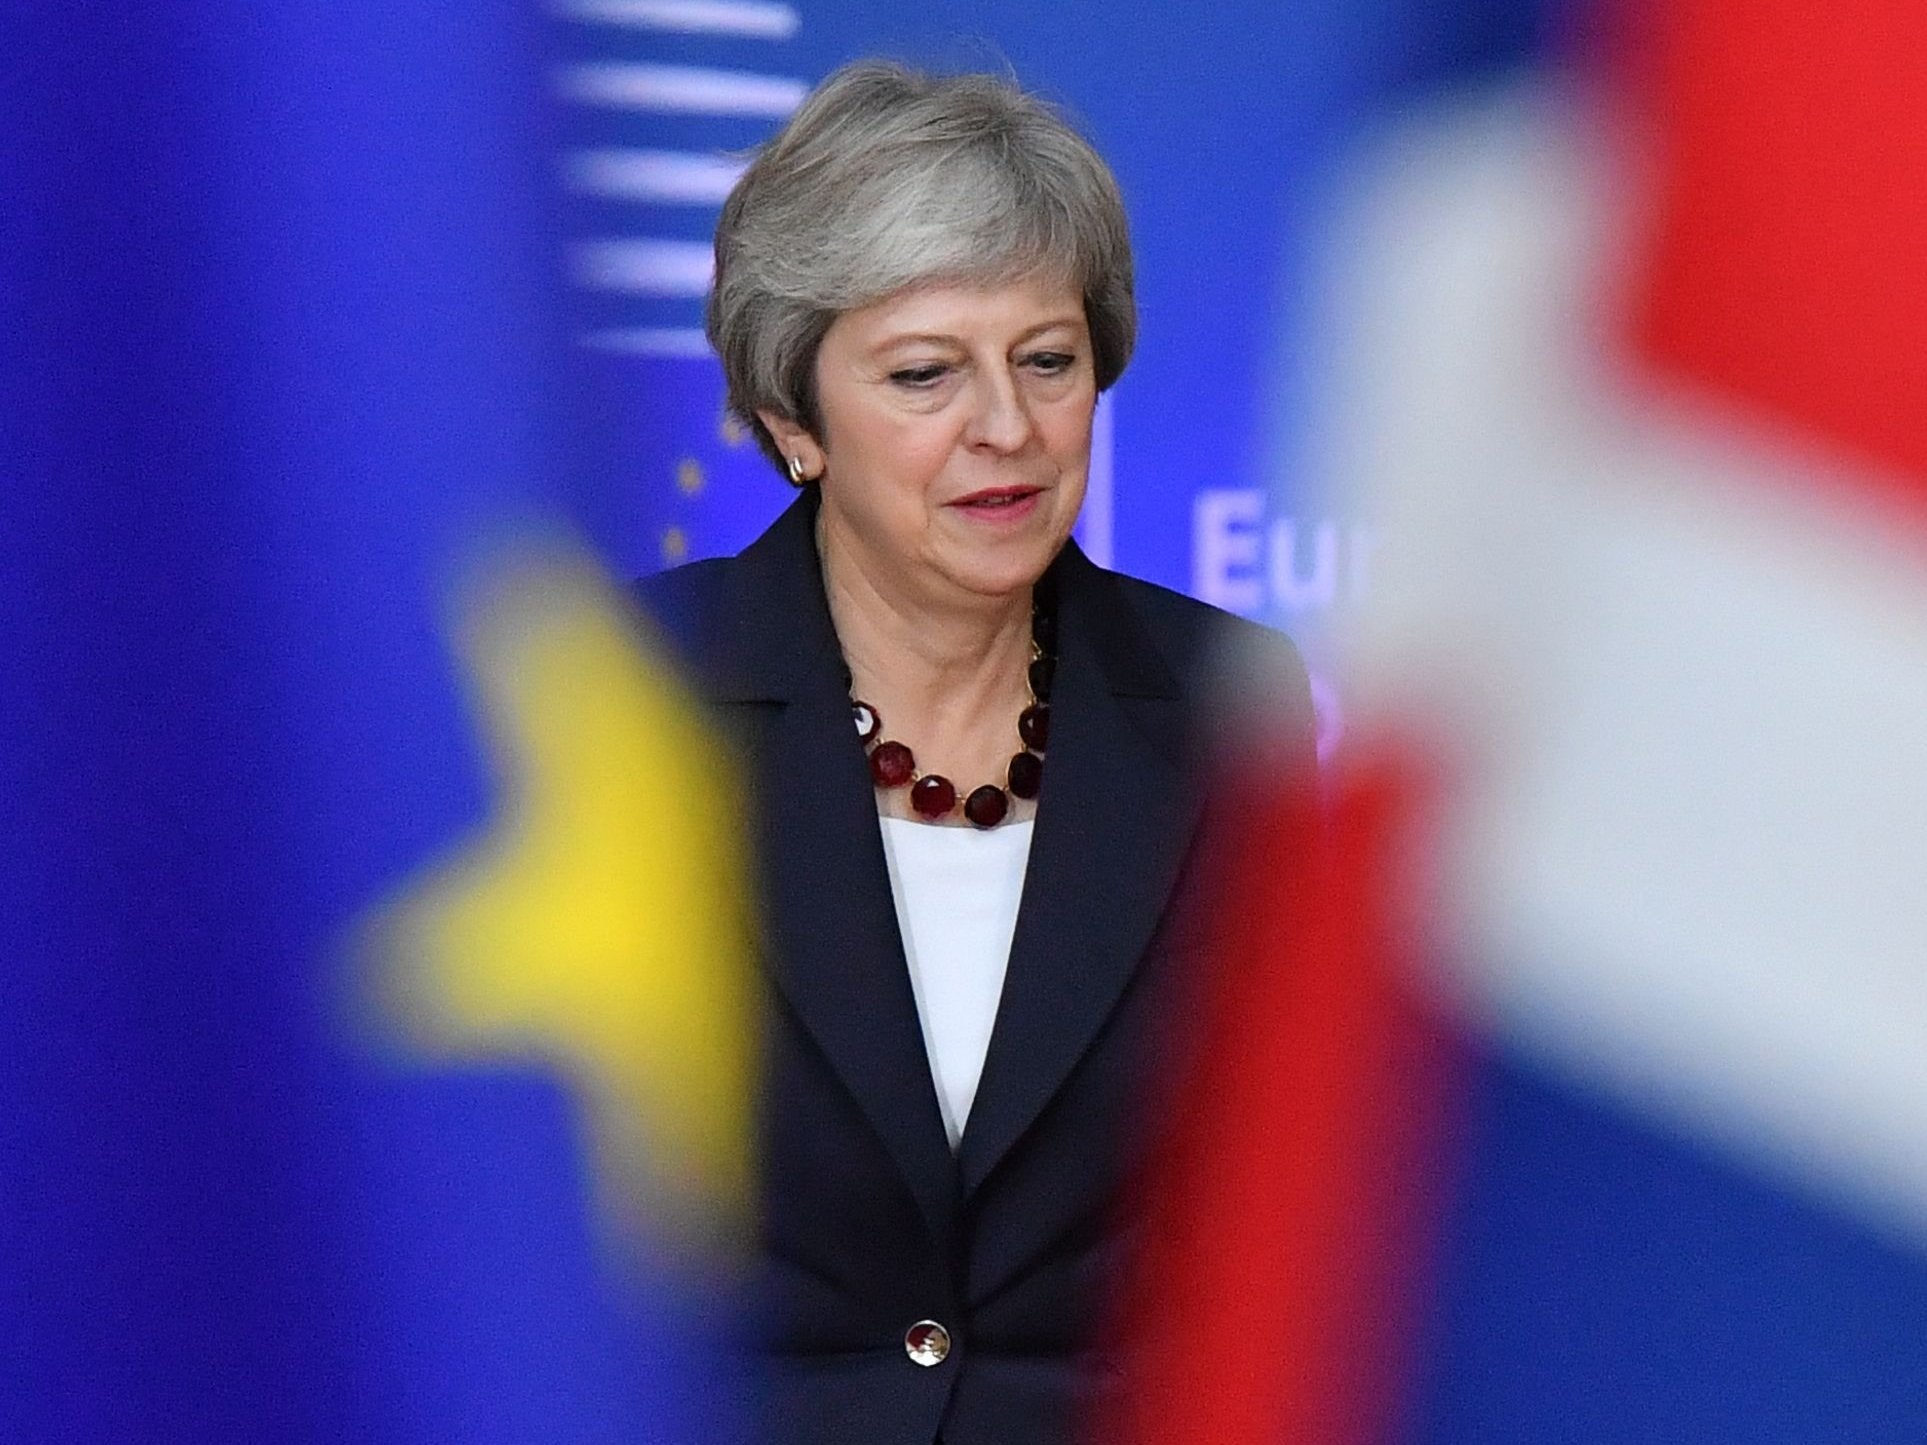 Ms May at the European Council in October